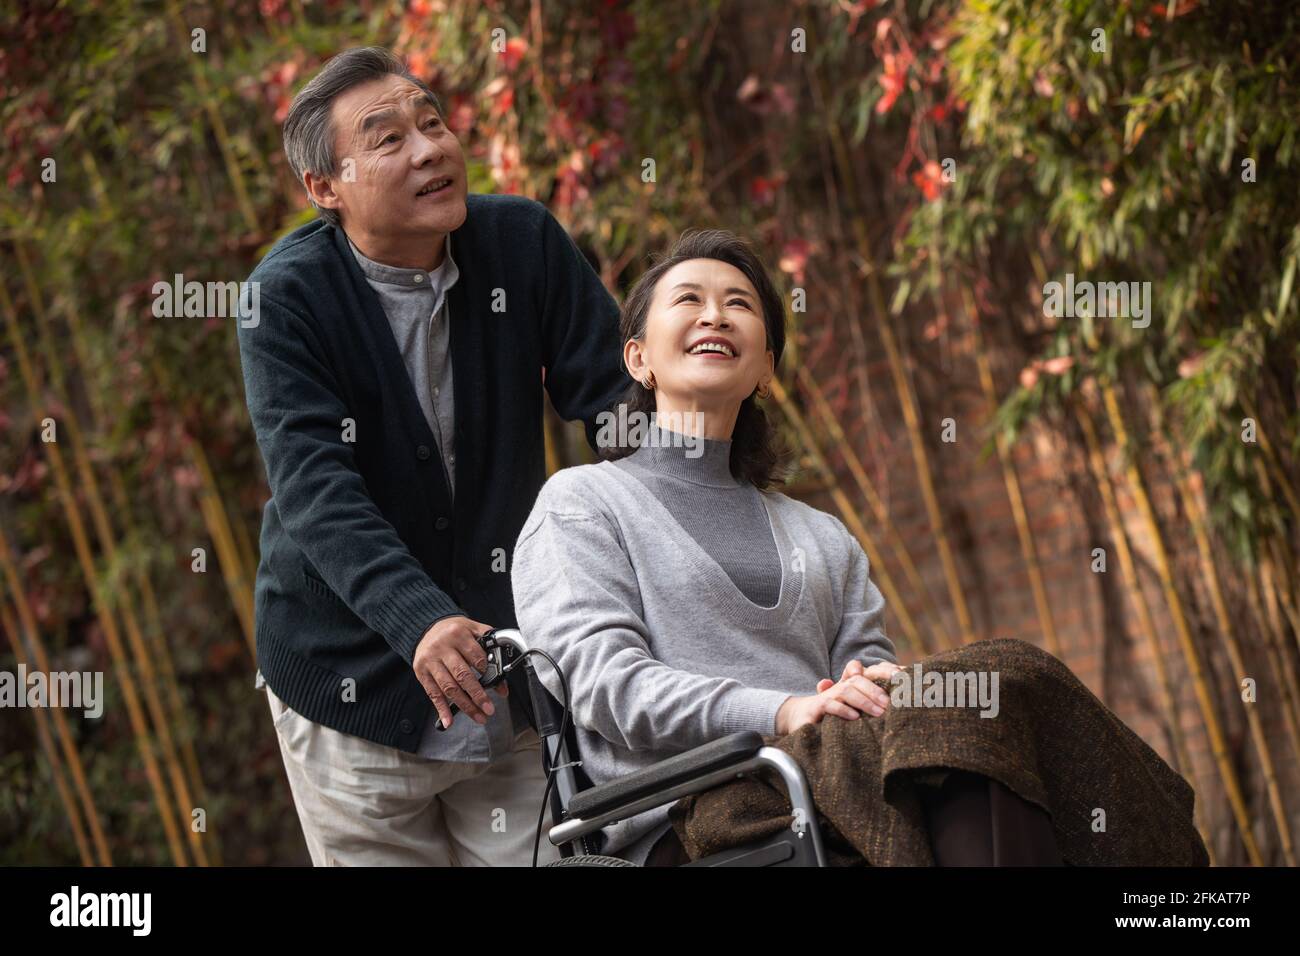 The old man pushed the wheelchair's wife Stock Photo